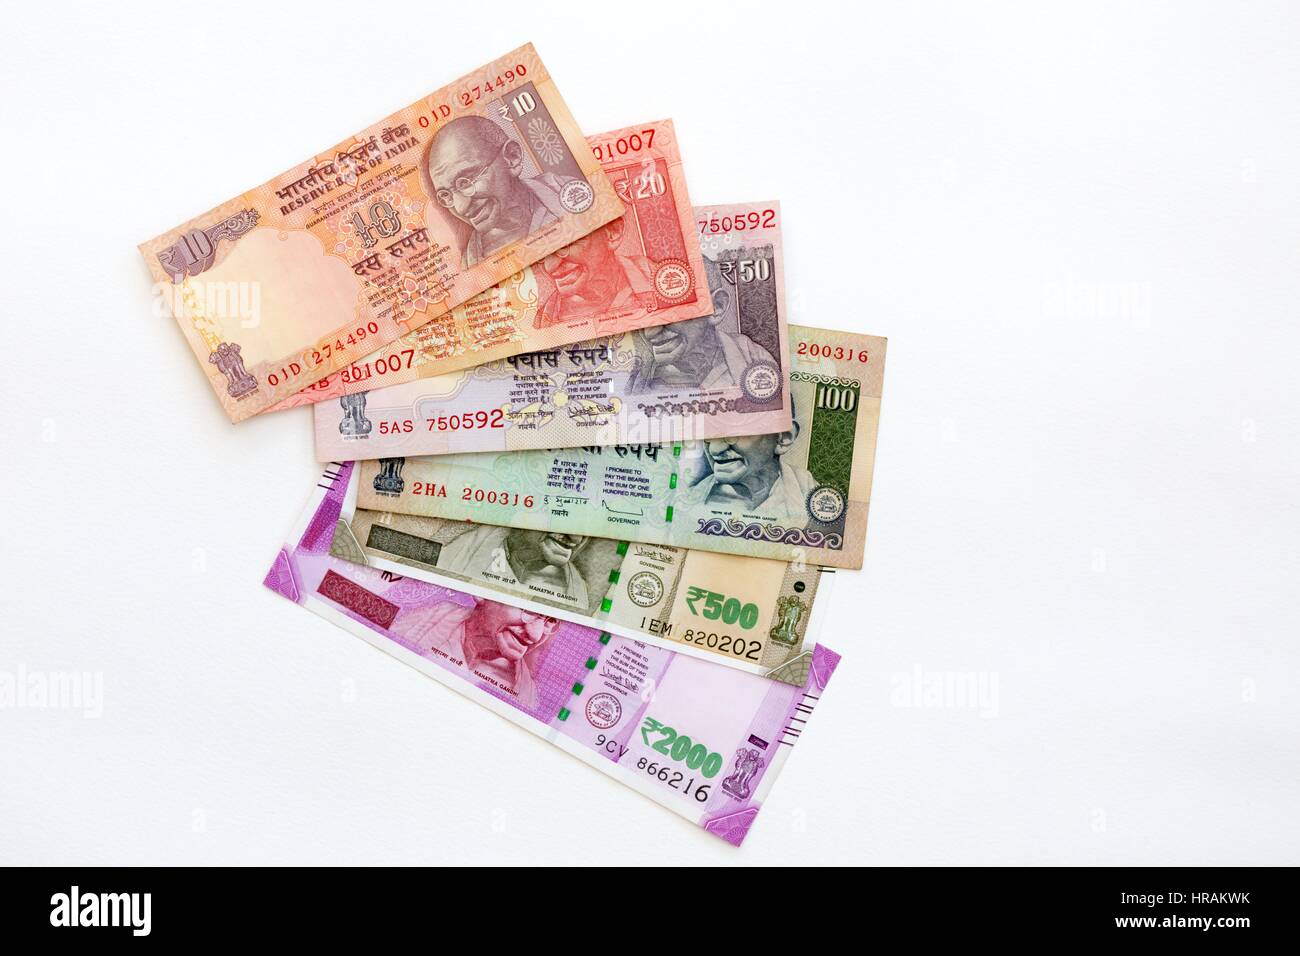 Indian Rupees - Indian currency notes of various denominations on a white background Stock Photo